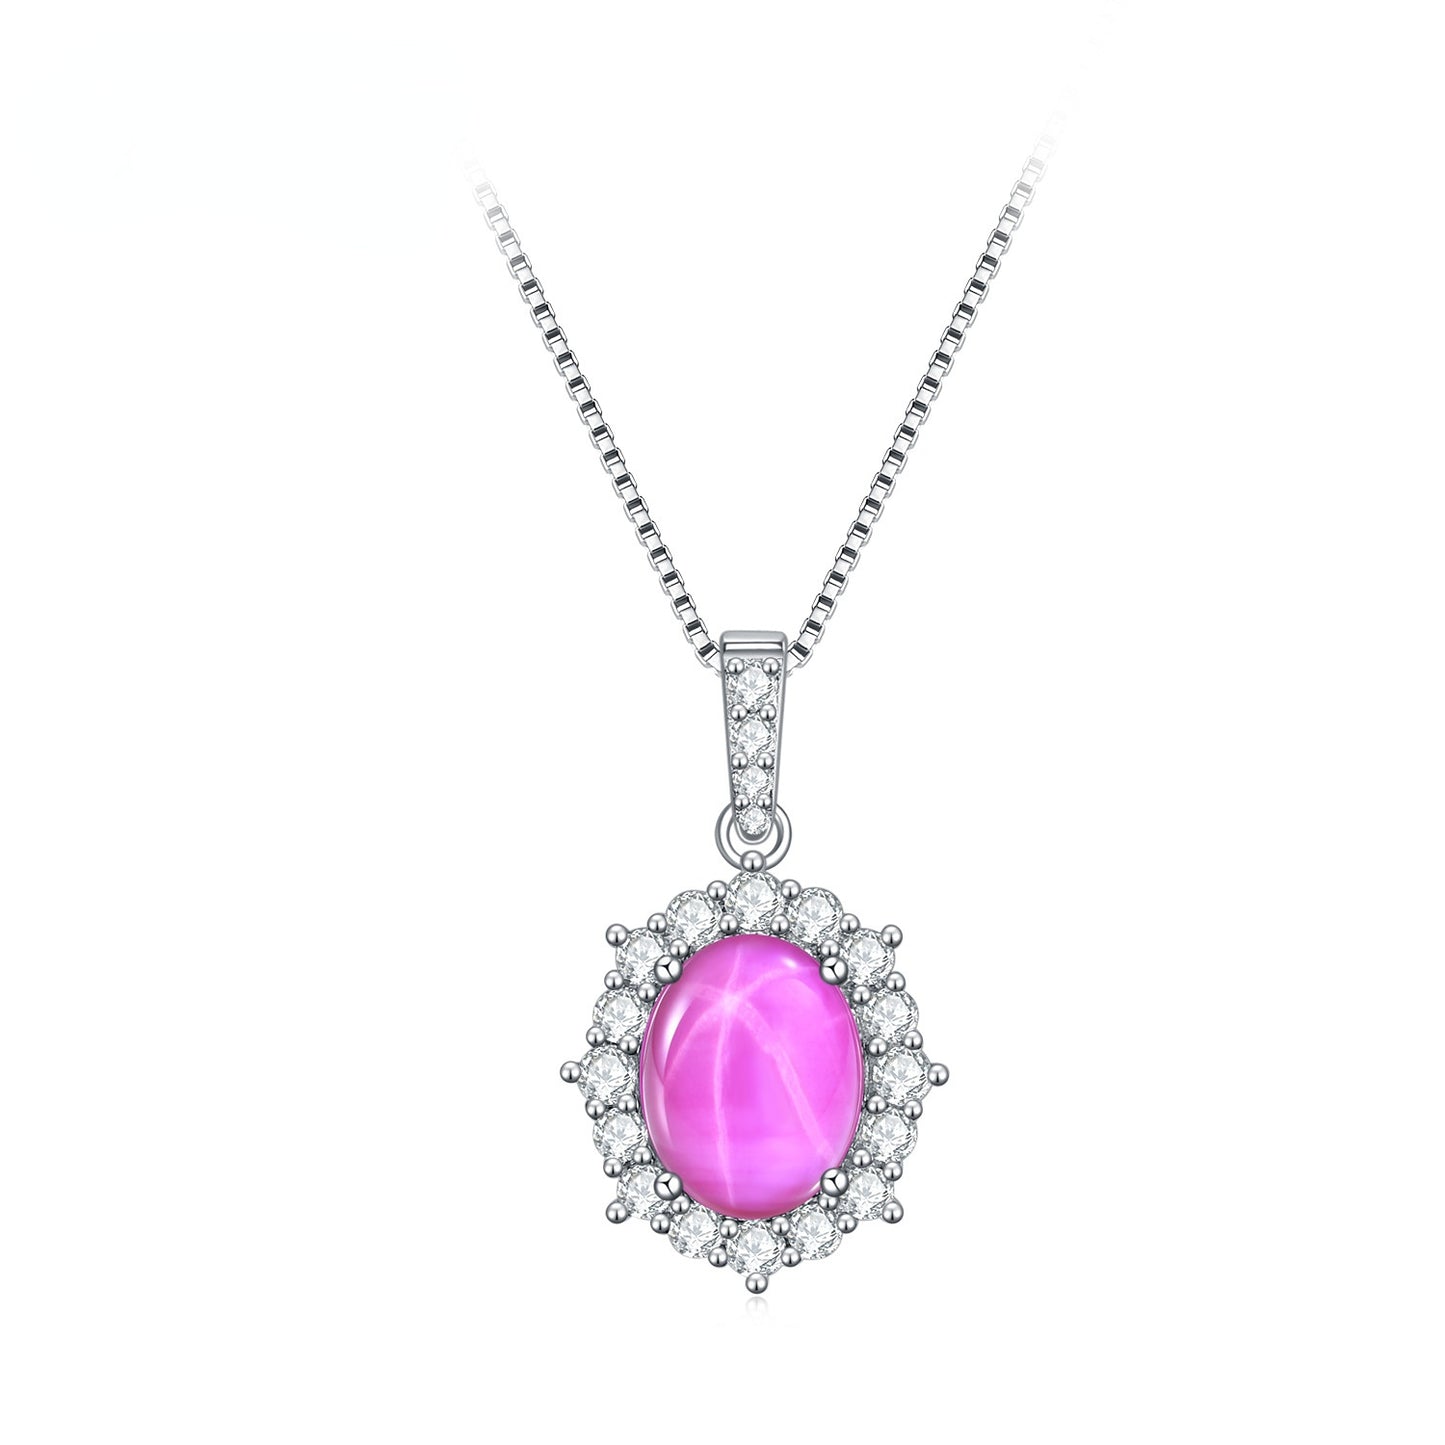 European Fashion Luxury Jewelry Design Six Starlight Synthetic Gemstone Soleste Halo Oval Pendant Silver Necklace for Women